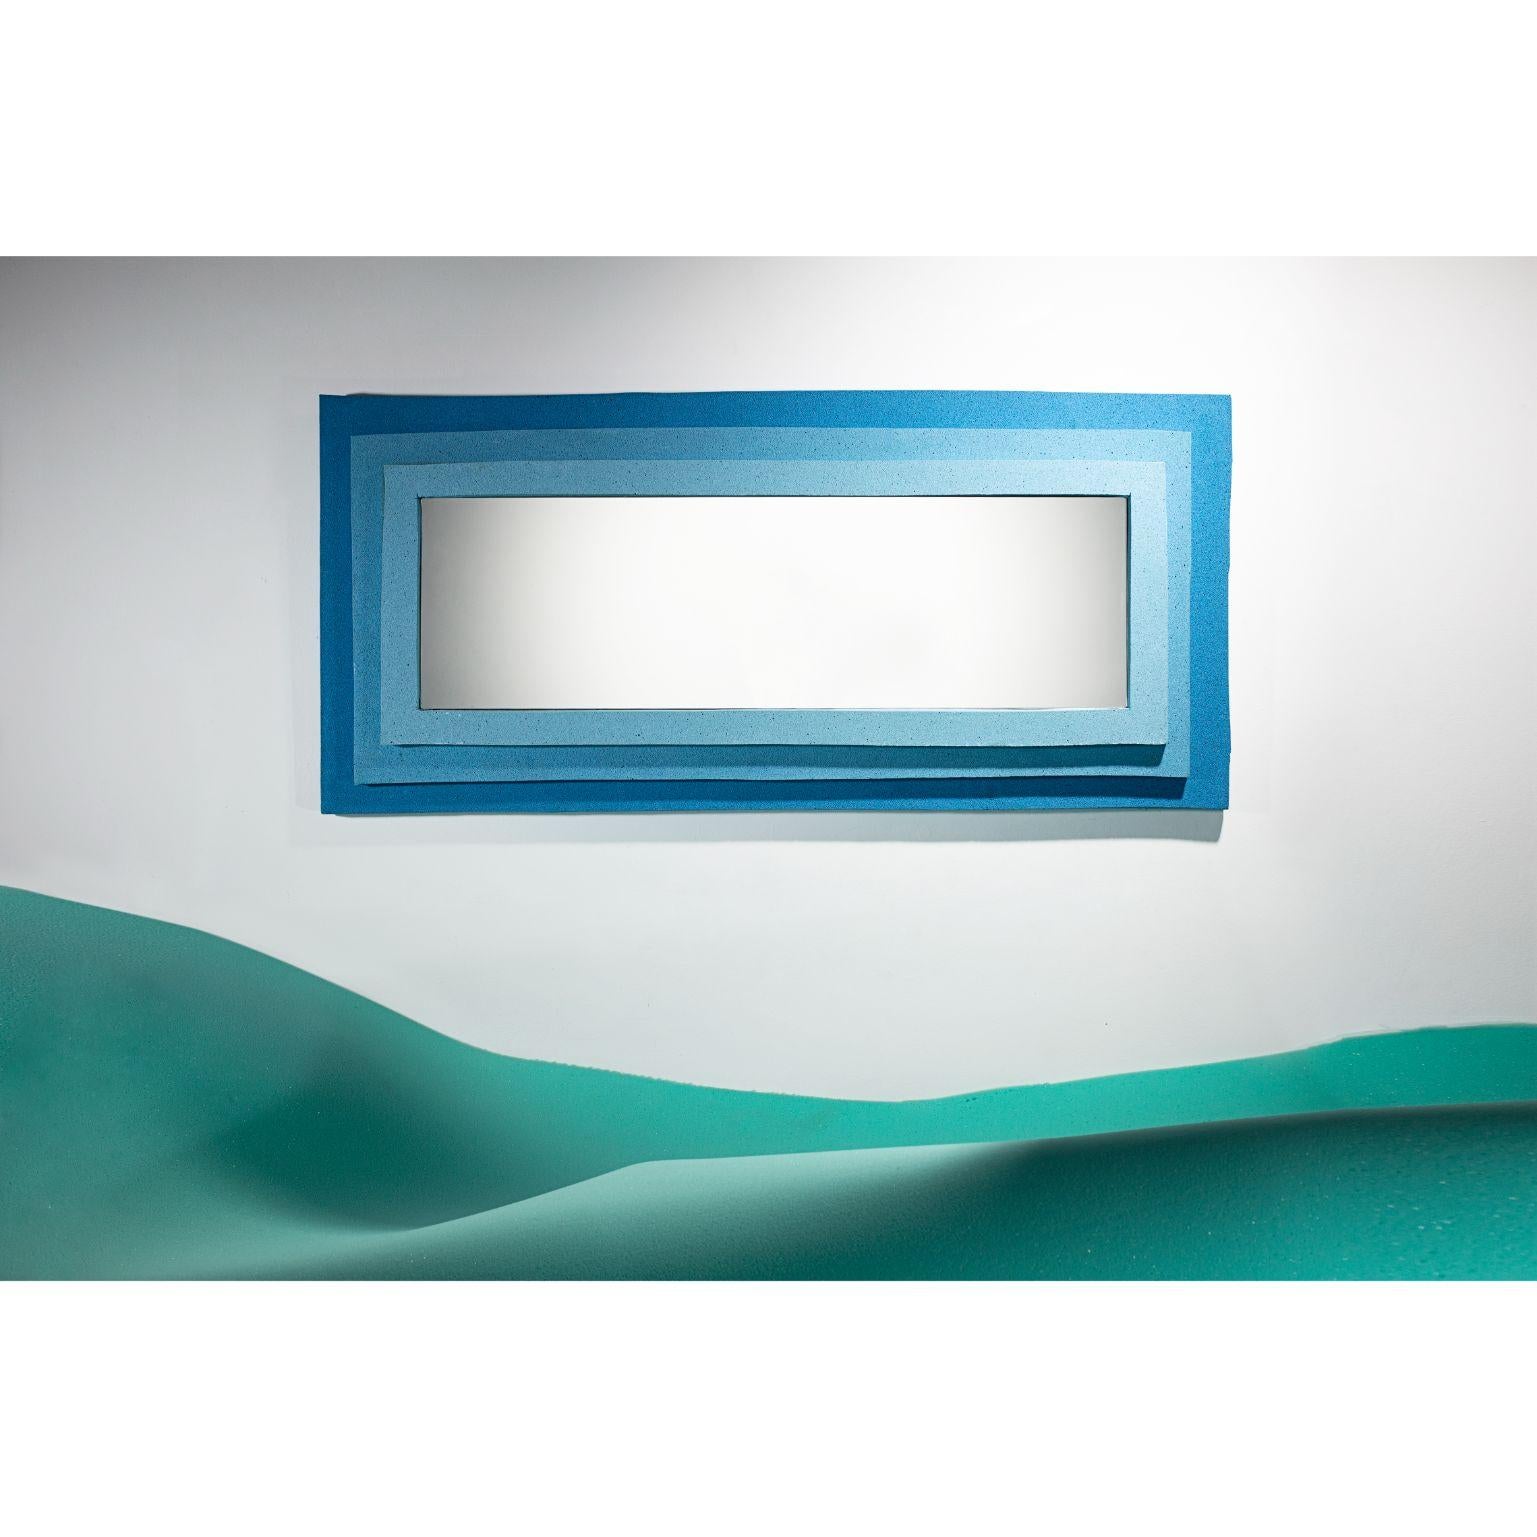 D33 - Mirror by Cultivado Em Casa
Dimensions: 130 x 11 x 60 cm
Materials: D33 foam, acrylic paint, acrylic resin, carbon steel.

Also available: different colors.

The D33 collection is intended to enhance foam, a material so present in